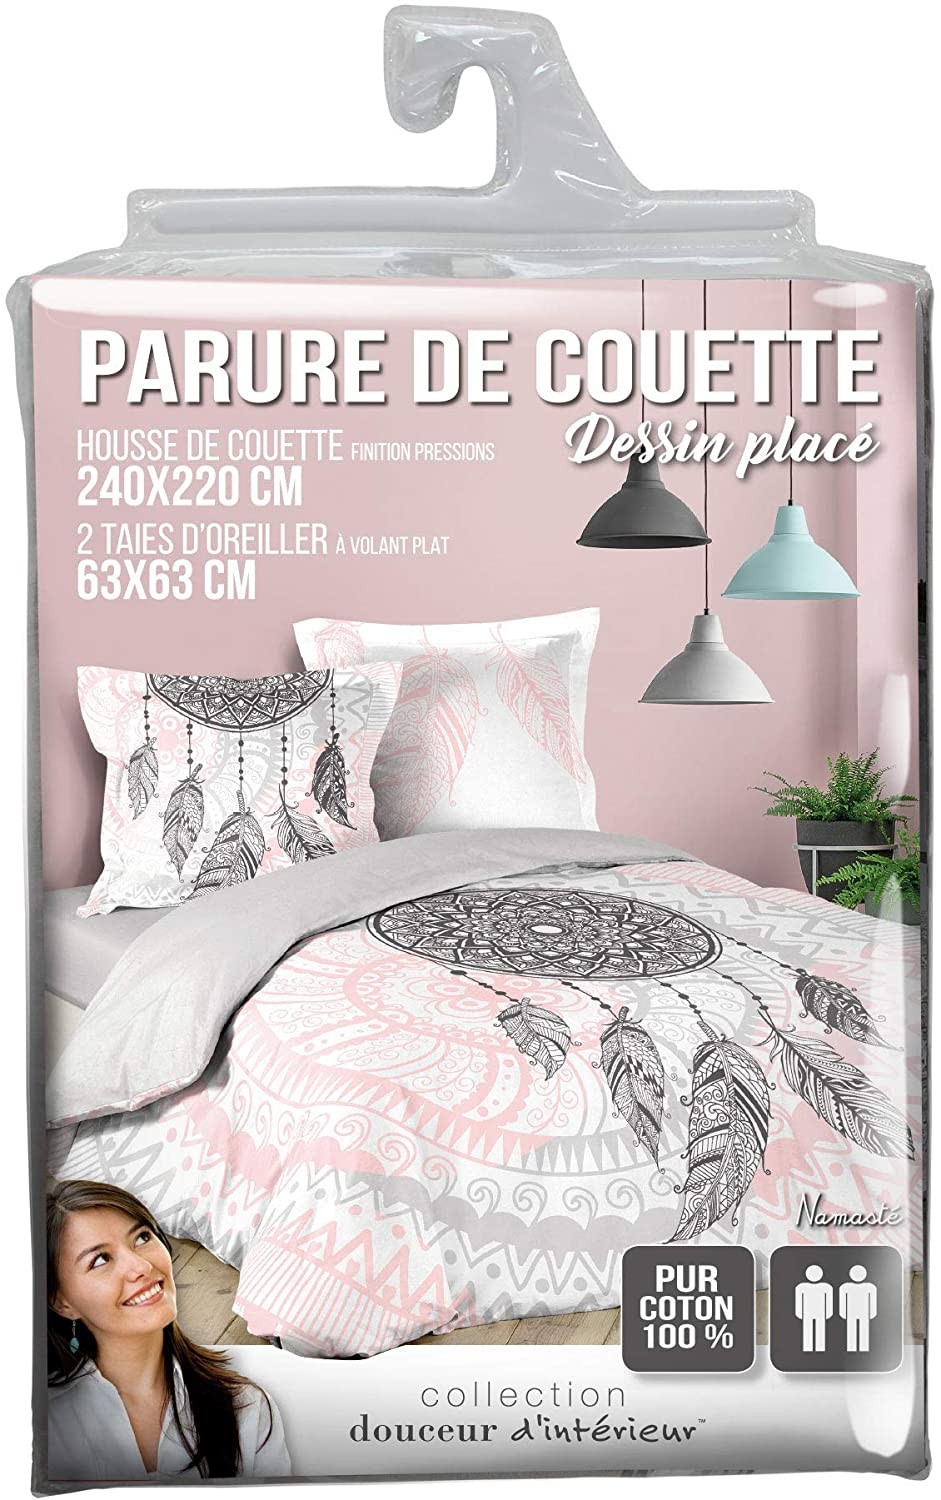 Pack parure 1 housse couette 240x220 + 2 to 63x63 attrape reves +